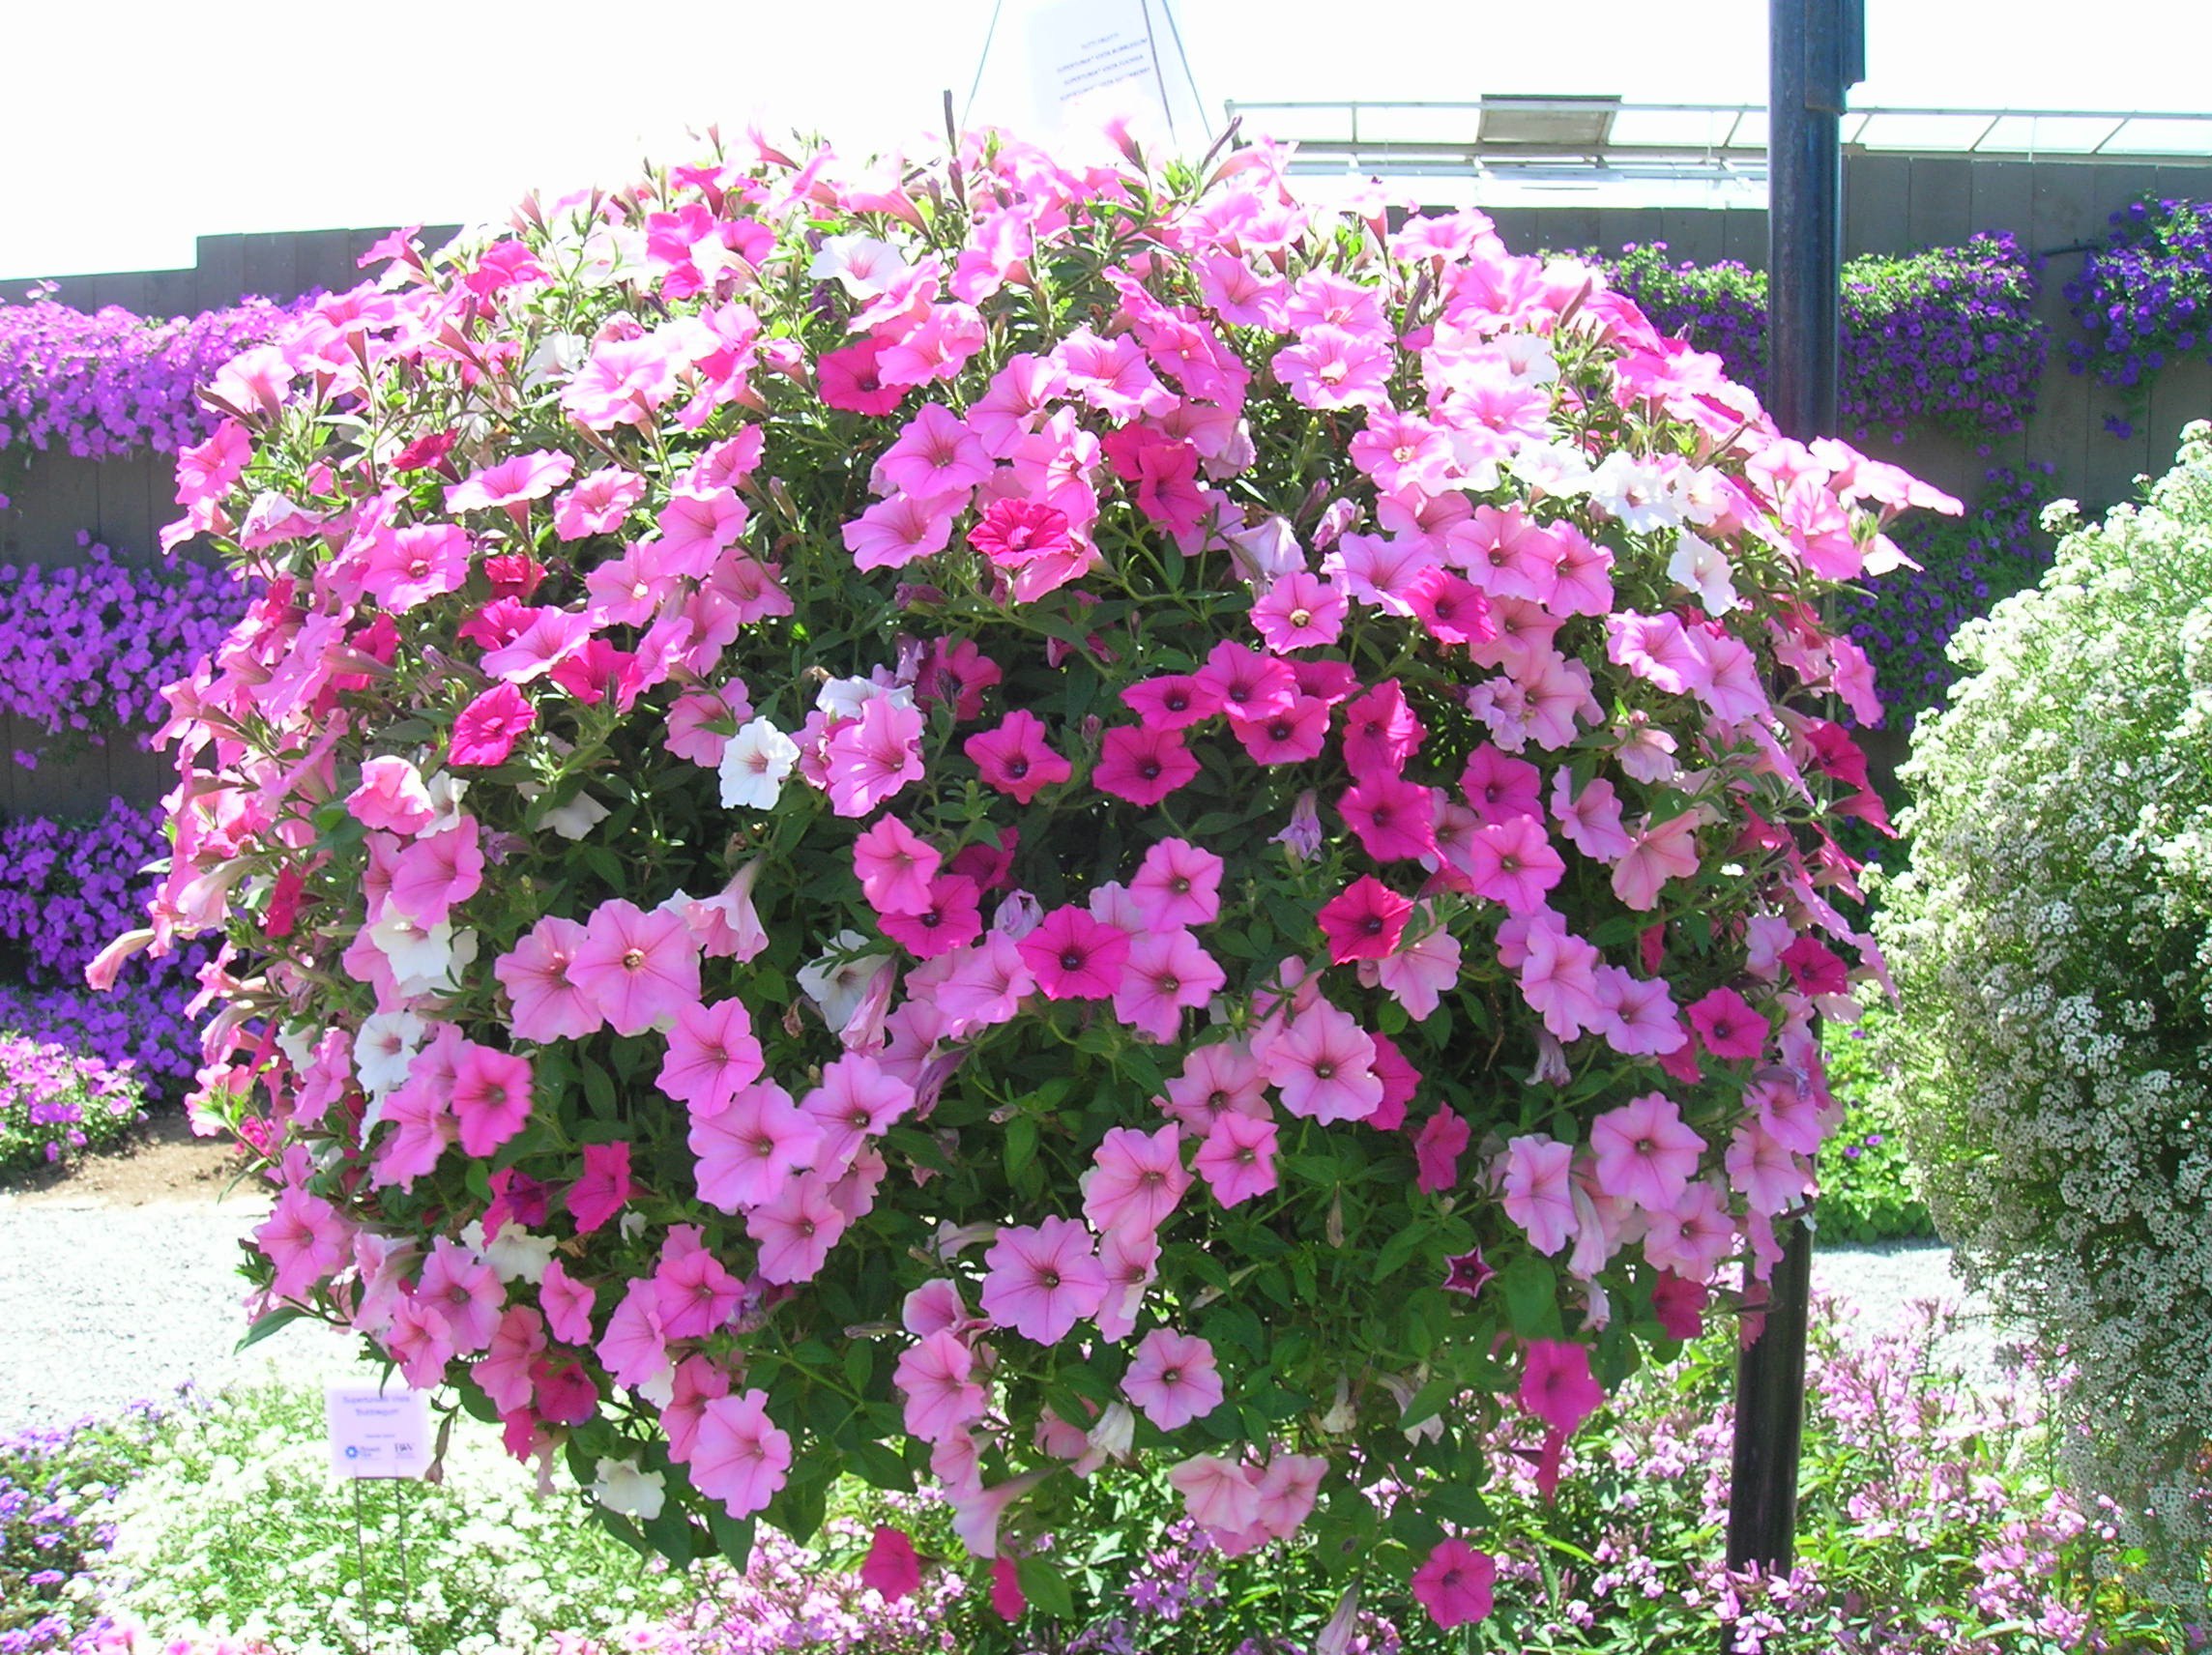 How to Grow: Petunia- Growing and Caring for Petunia Flowers